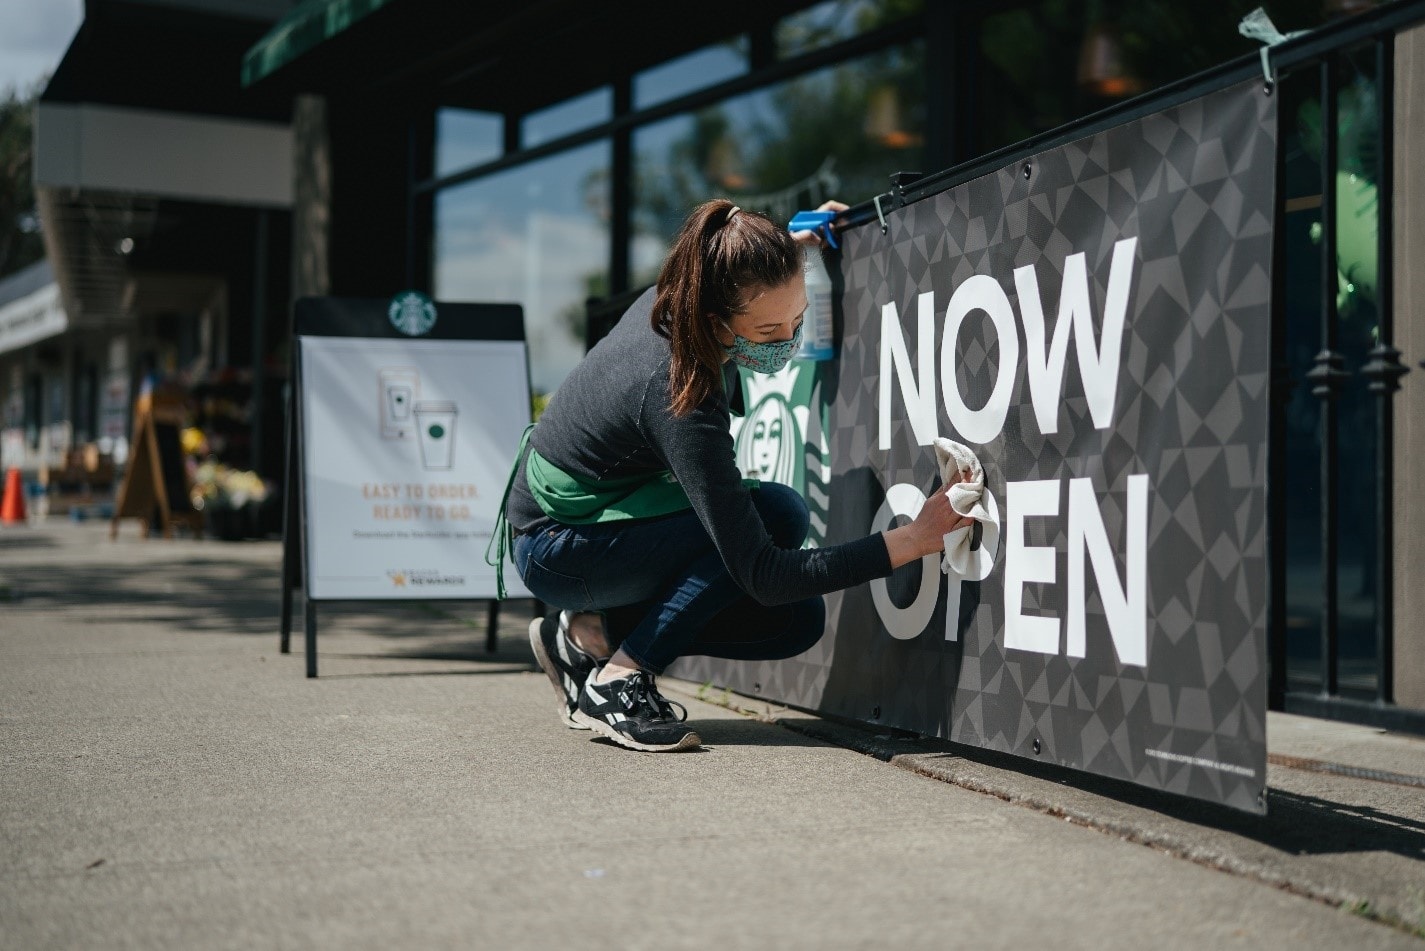 Starbucks employee wiping down a now open sign outside a Starbucks store